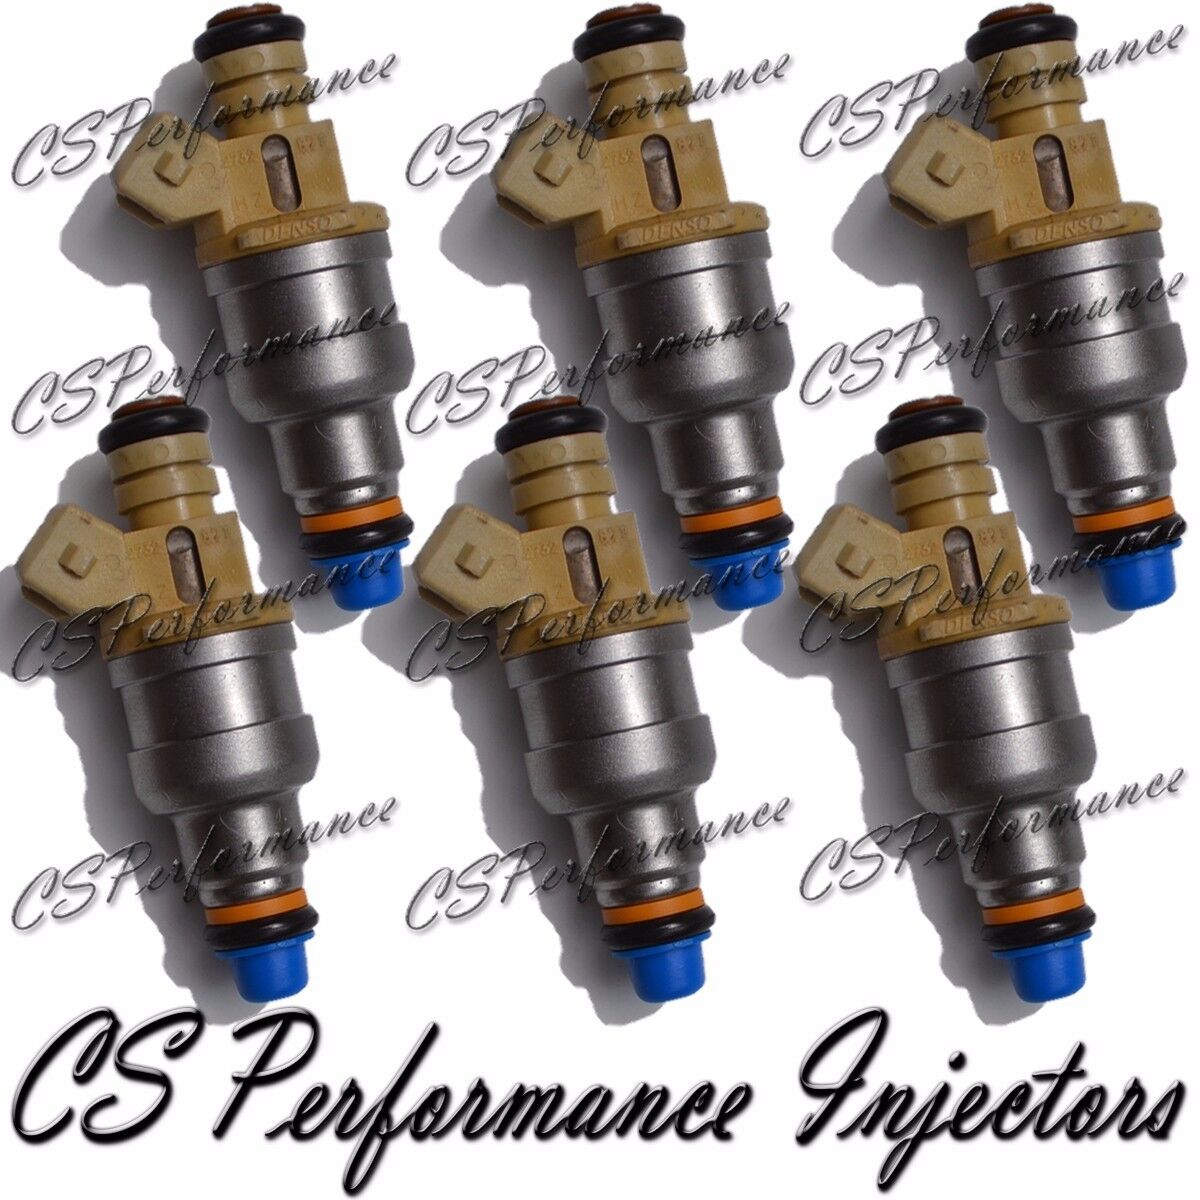 OEM Fuel Injectors Set for Ford (6) F47E-A2E for 1986-1993 Ford Mercury 3.0 2.3